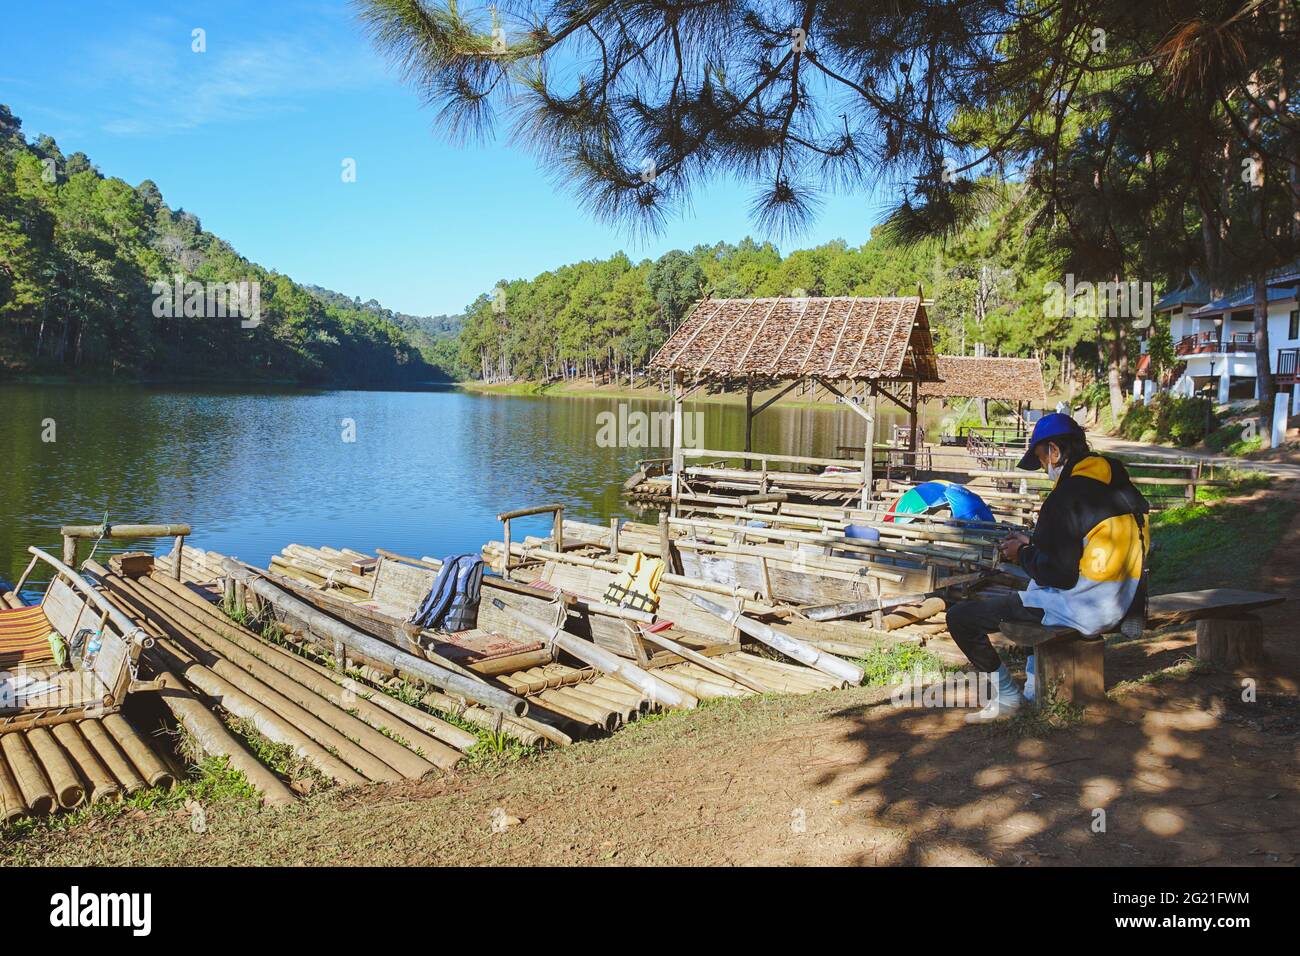 Mae Hong Son, Thailand - December 15, 2020: service worker of  Pang Oung raft is sitting under a pine tree at Pang Oung Reservoir. Stock Photo